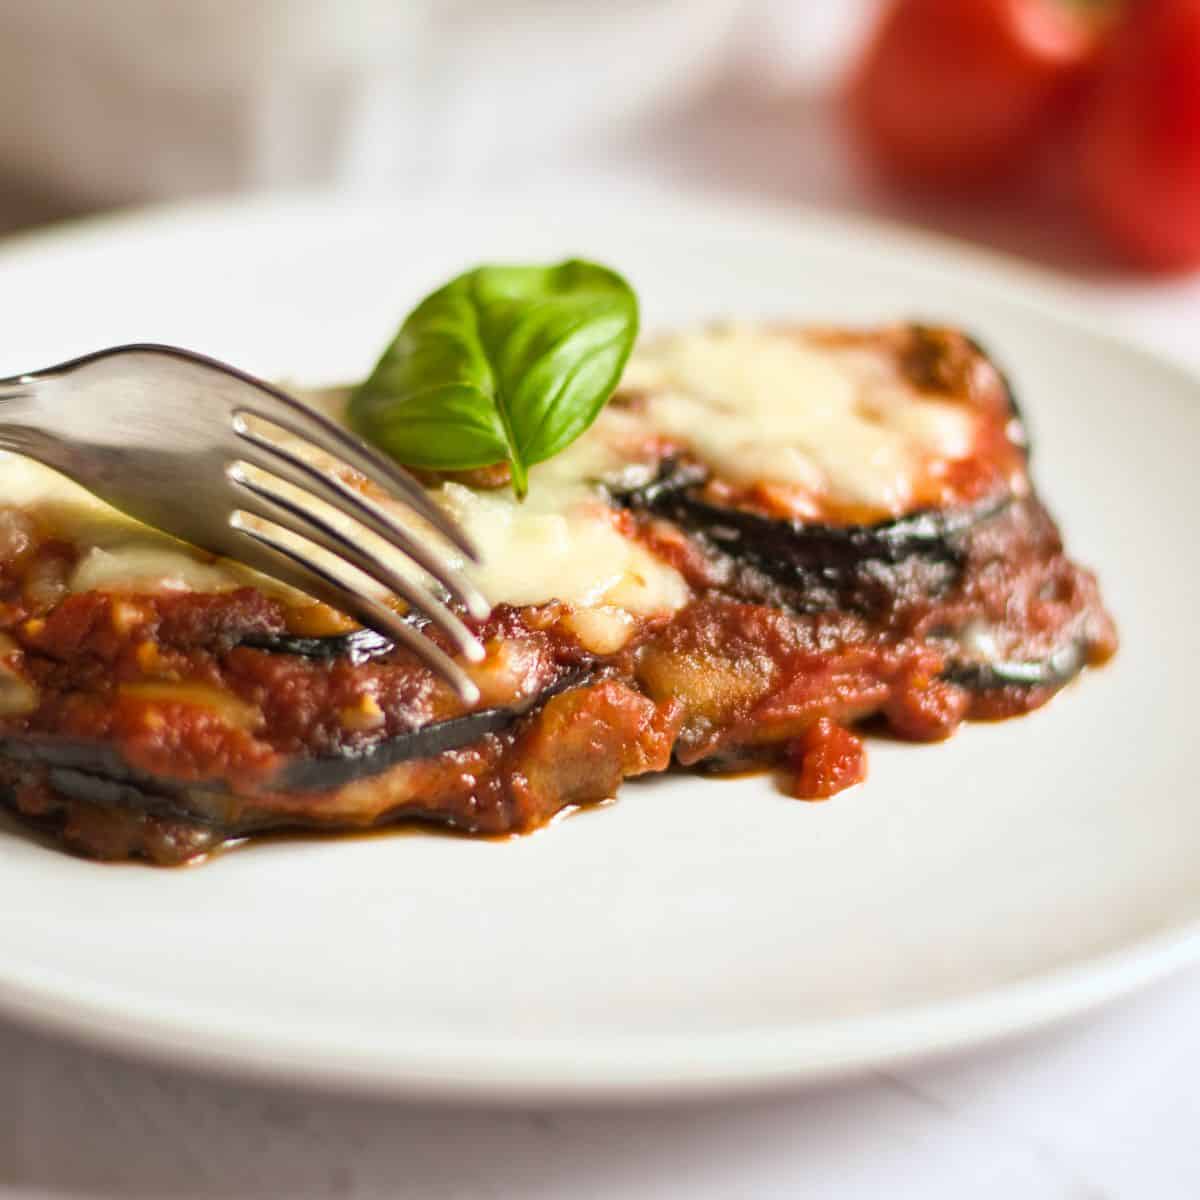 Baked Eggplant Parmesan Without Breadcrumbs Recipe on a white plate.